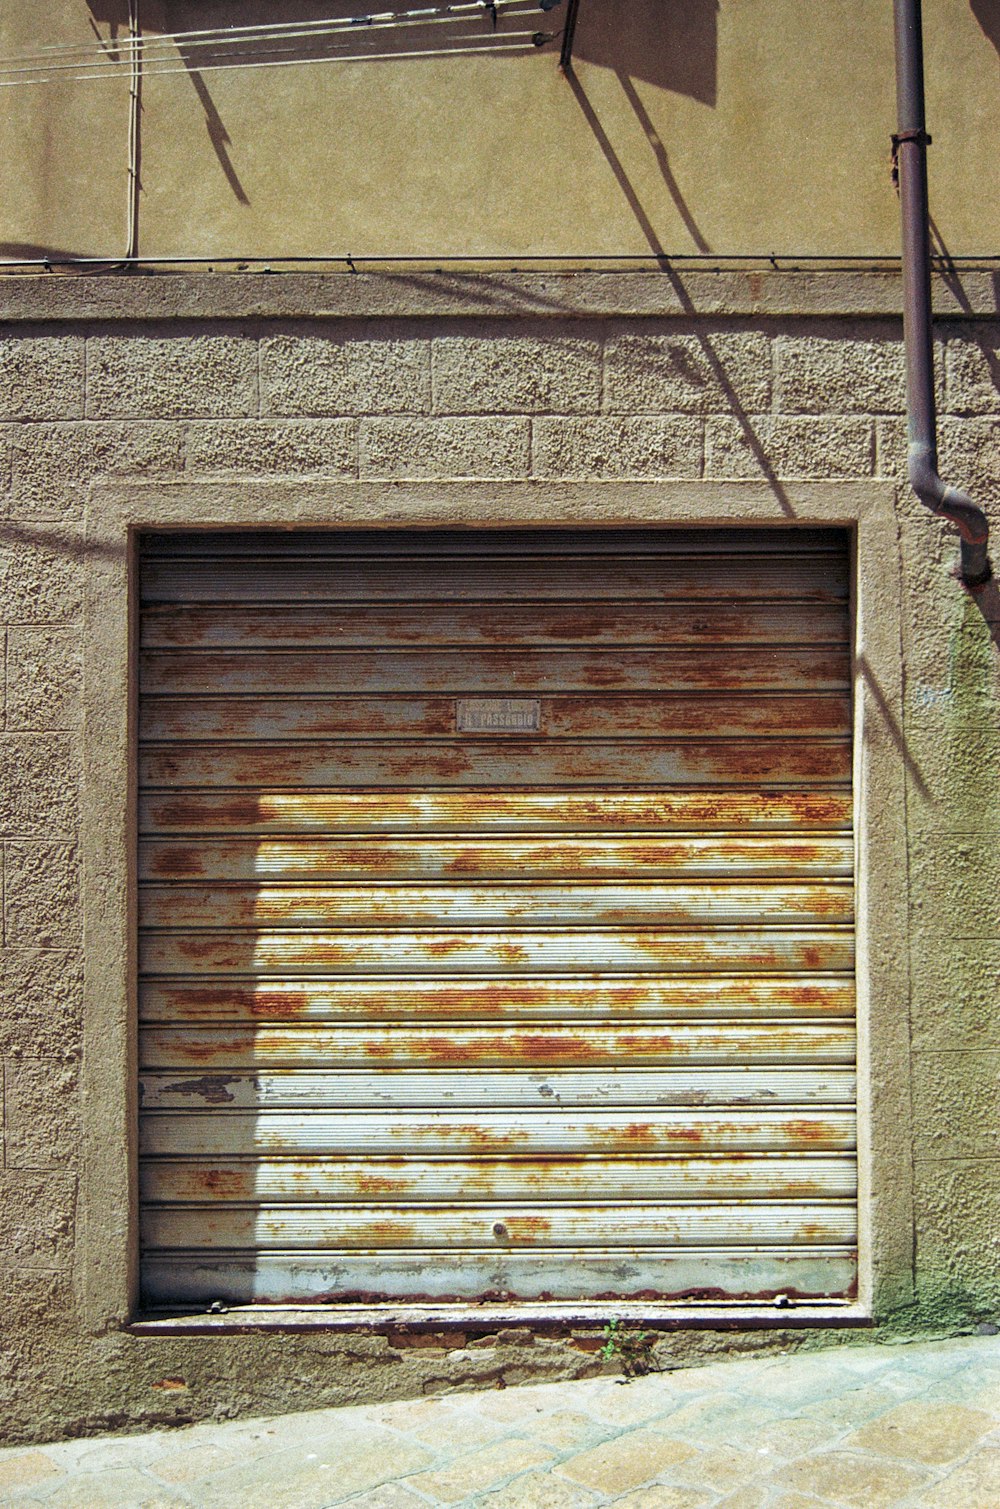 a closed garage door on the side of a building